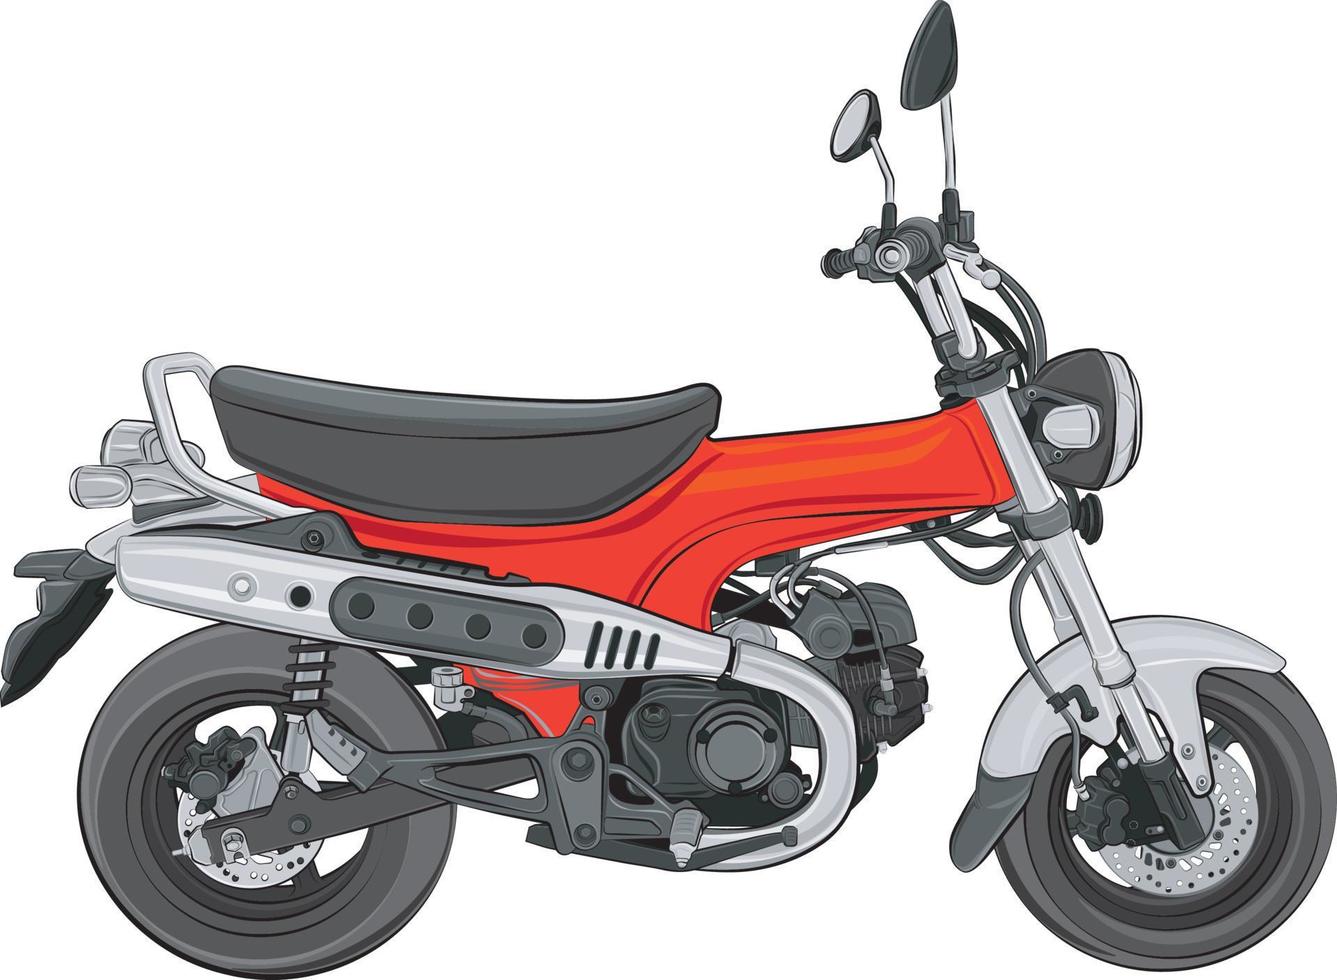 Mini bike motorcycle on a white background vector